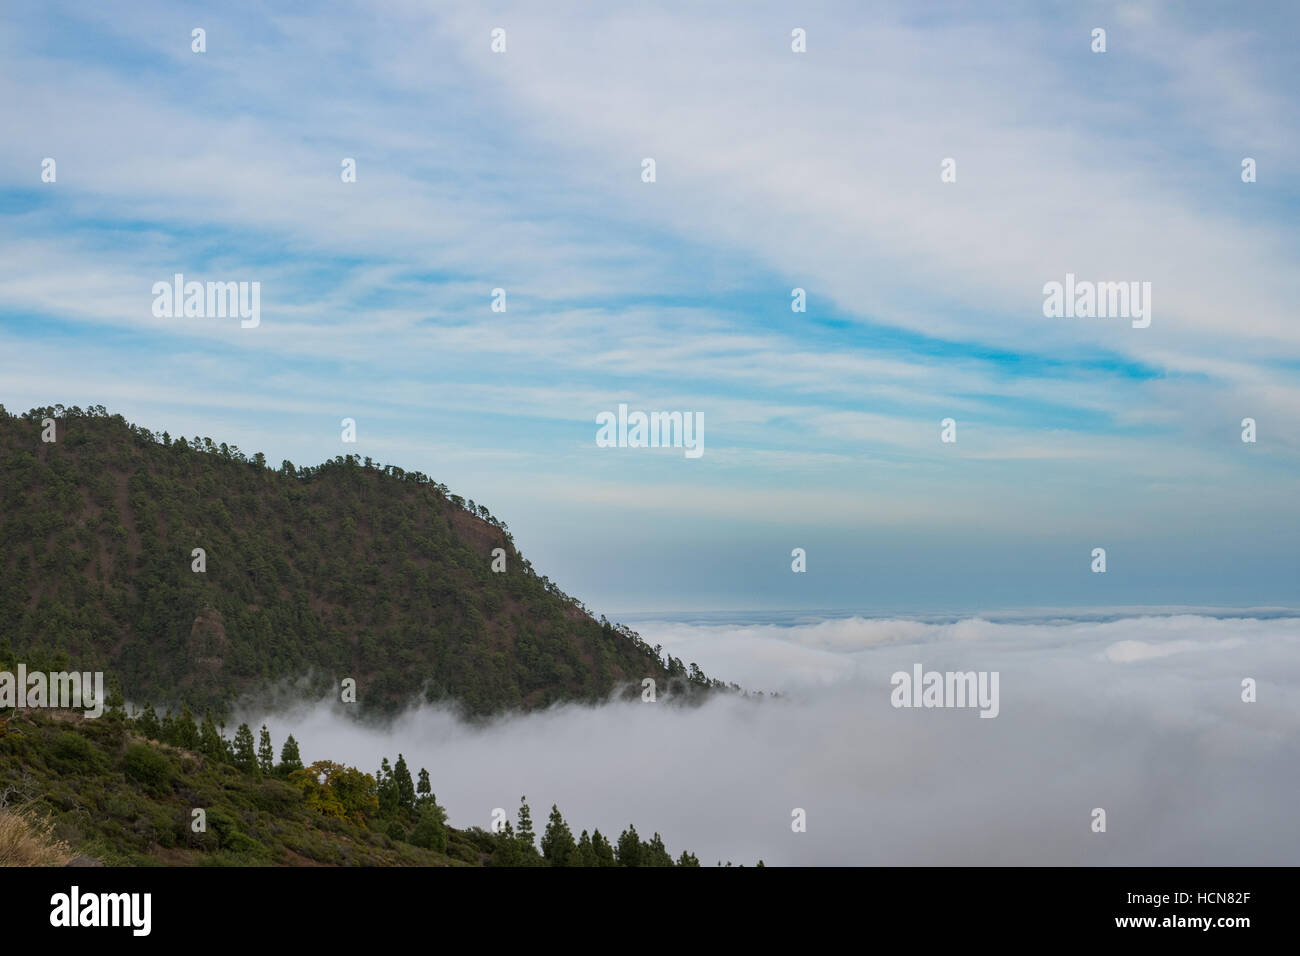 forest mountain landscape disappearing in sea of clouds Stock Photo